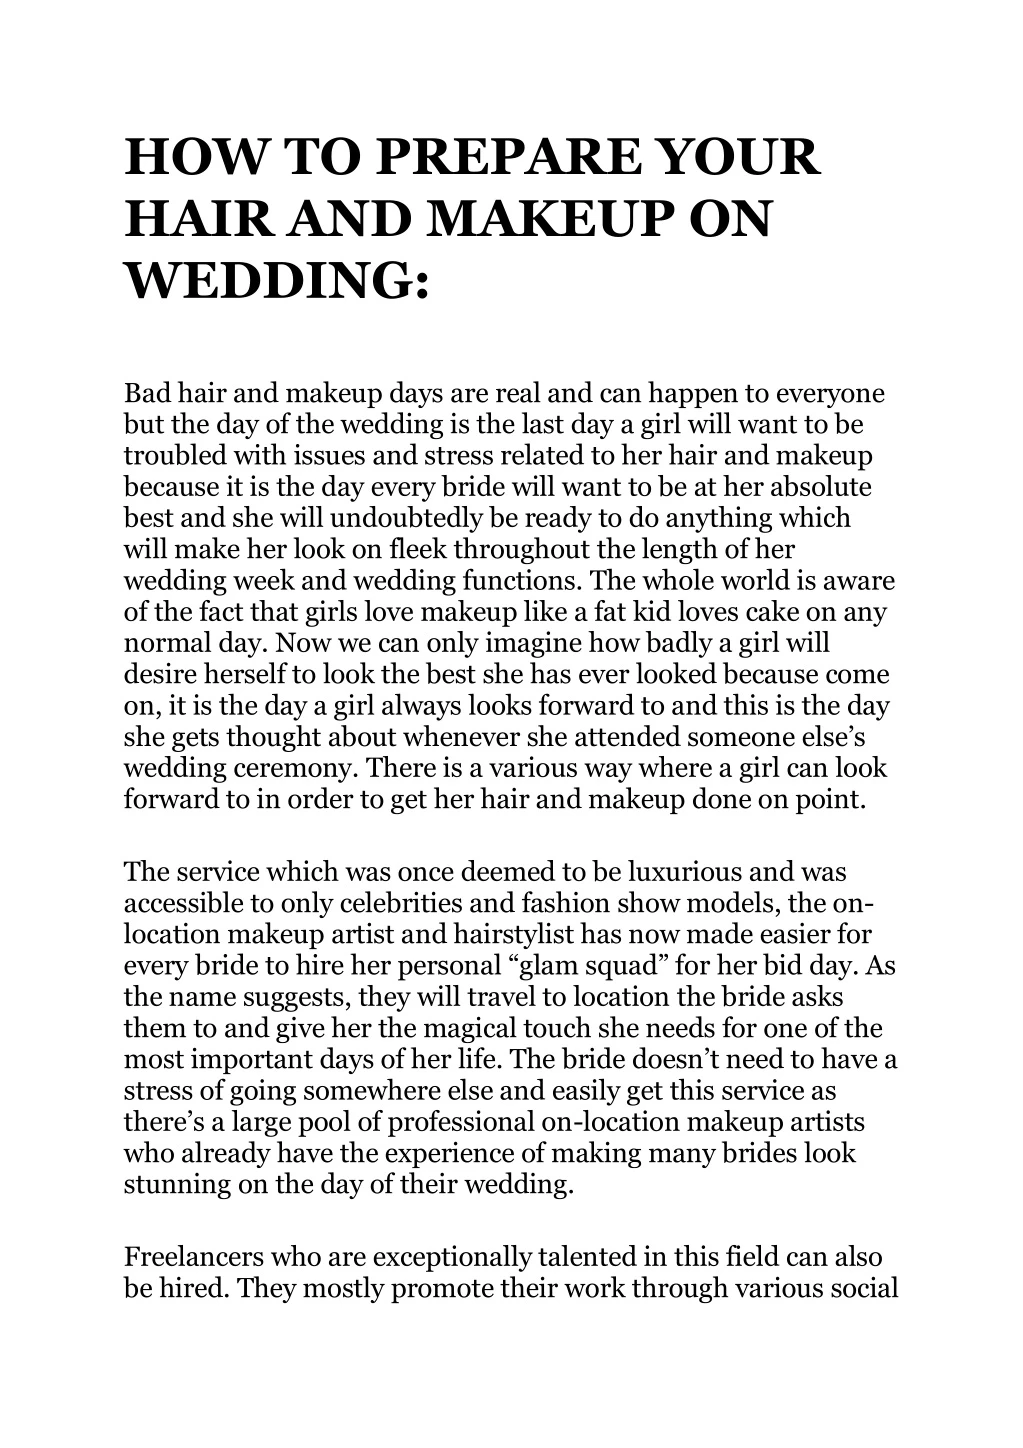 how to prepare your hair and makeup on wedding